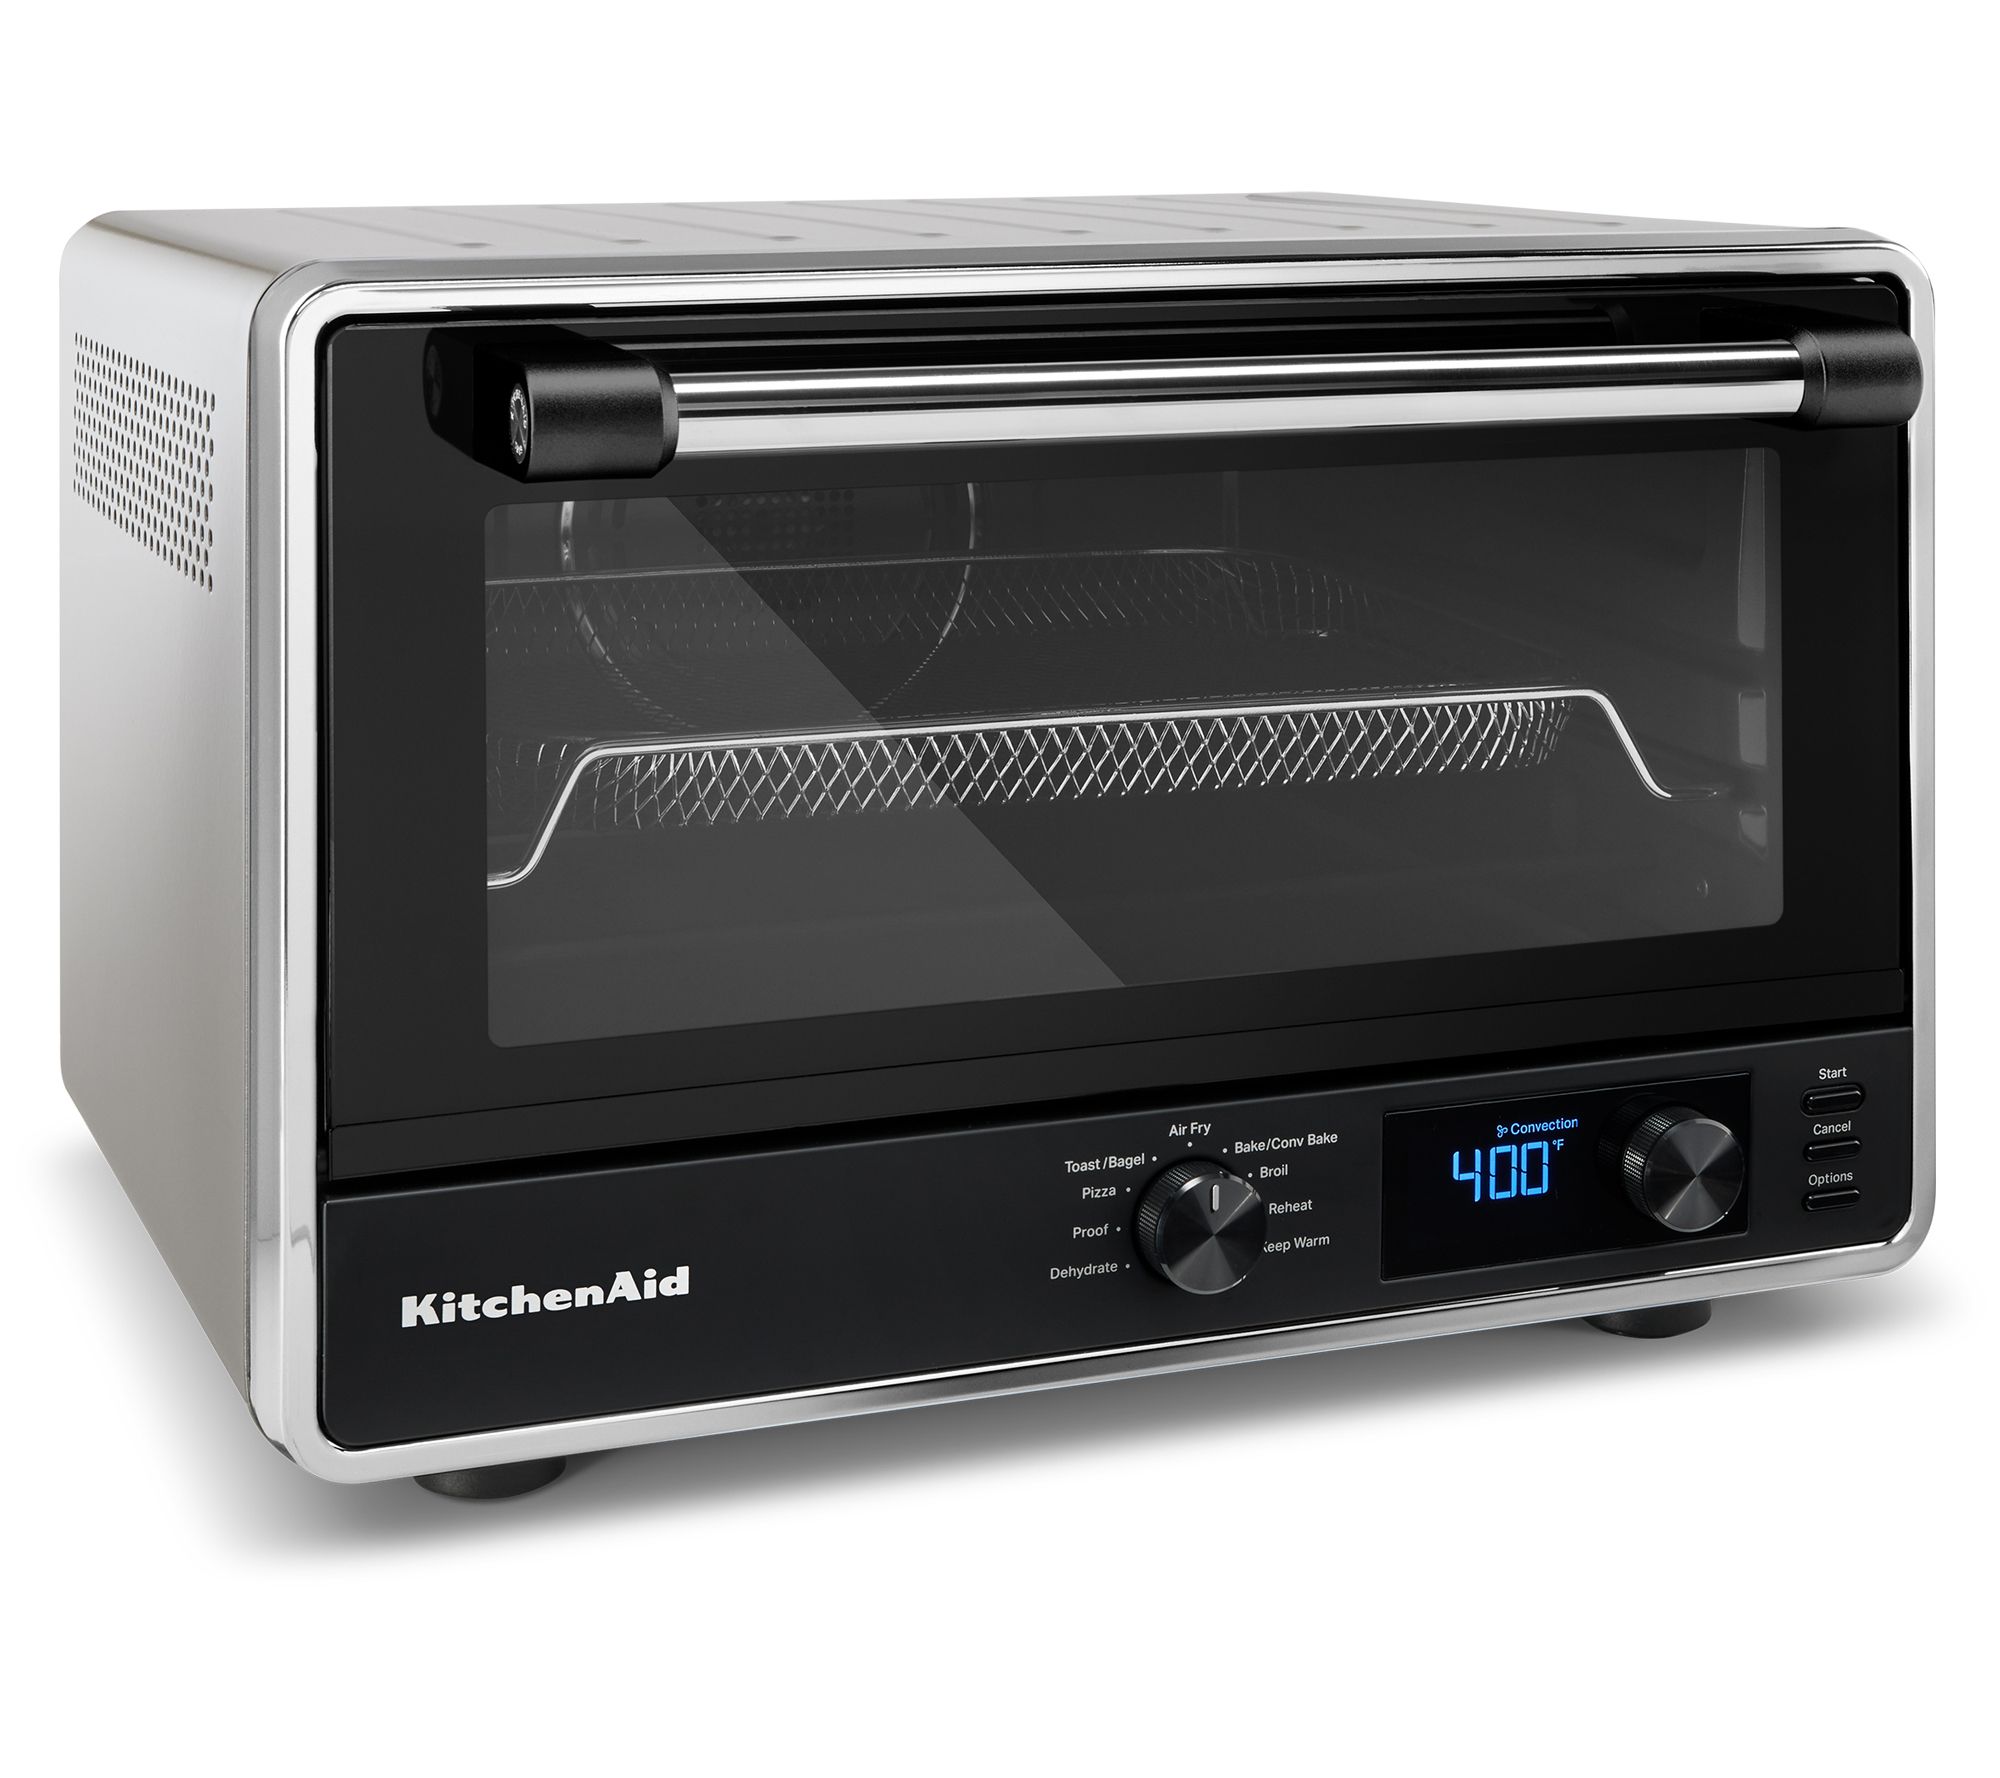 KitchenAid Digital Countertop Oven with Air Fry review: a complete kitchen  in one